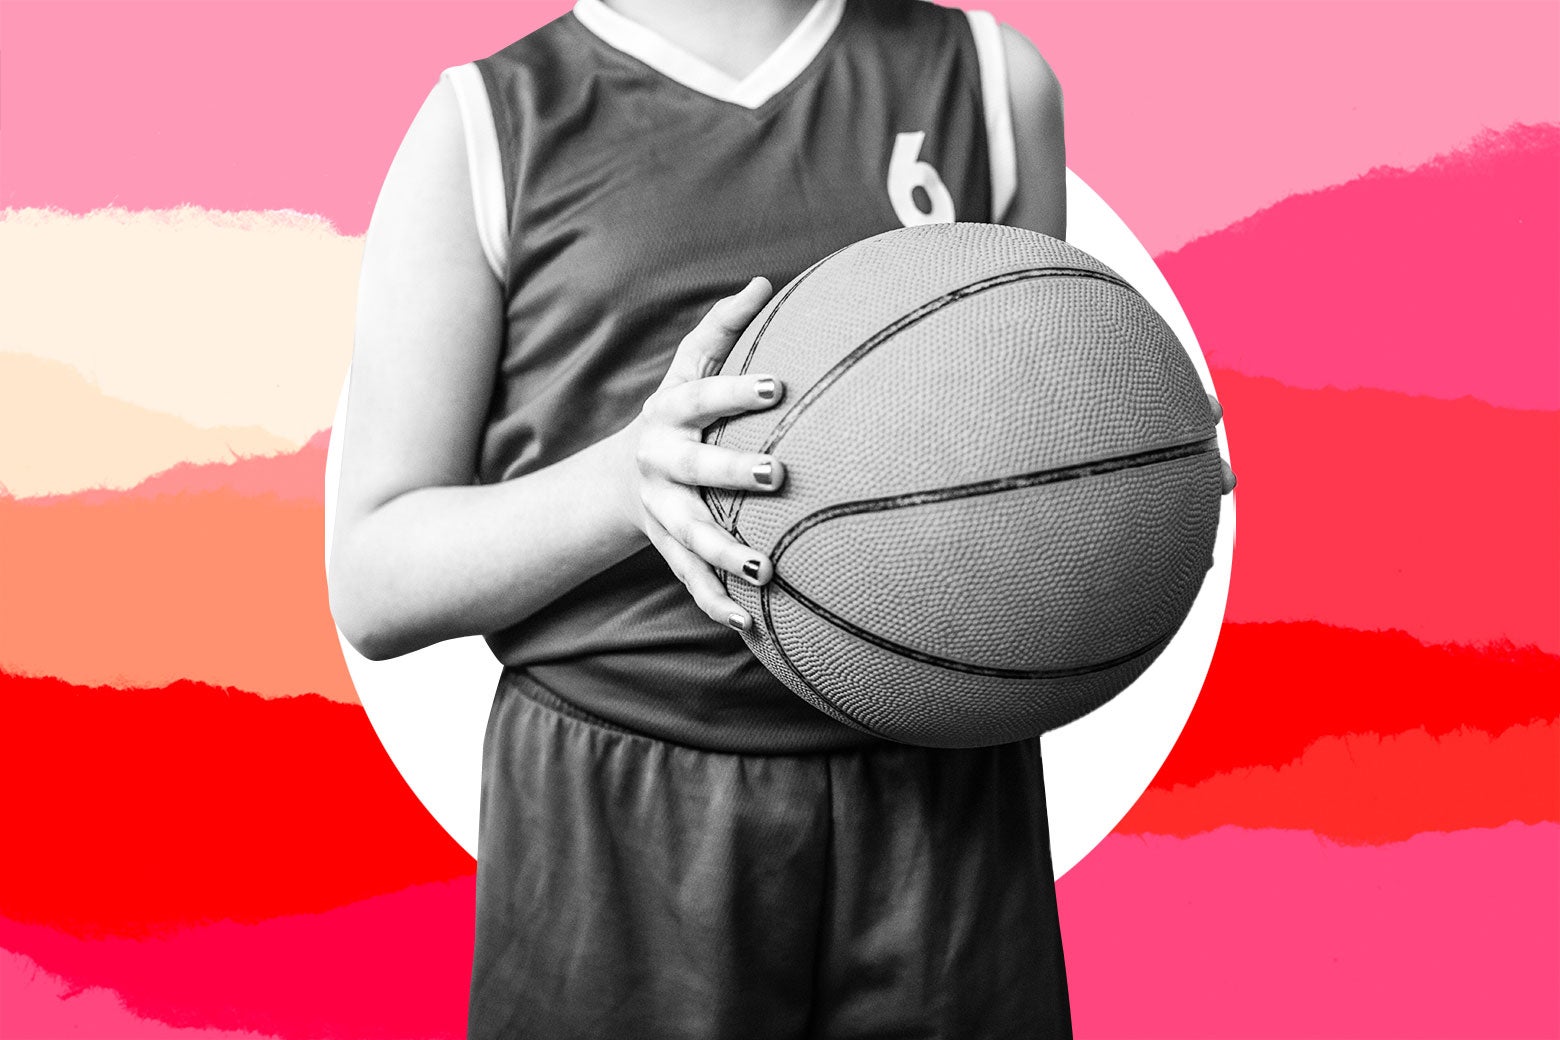 A child holds a basketball.